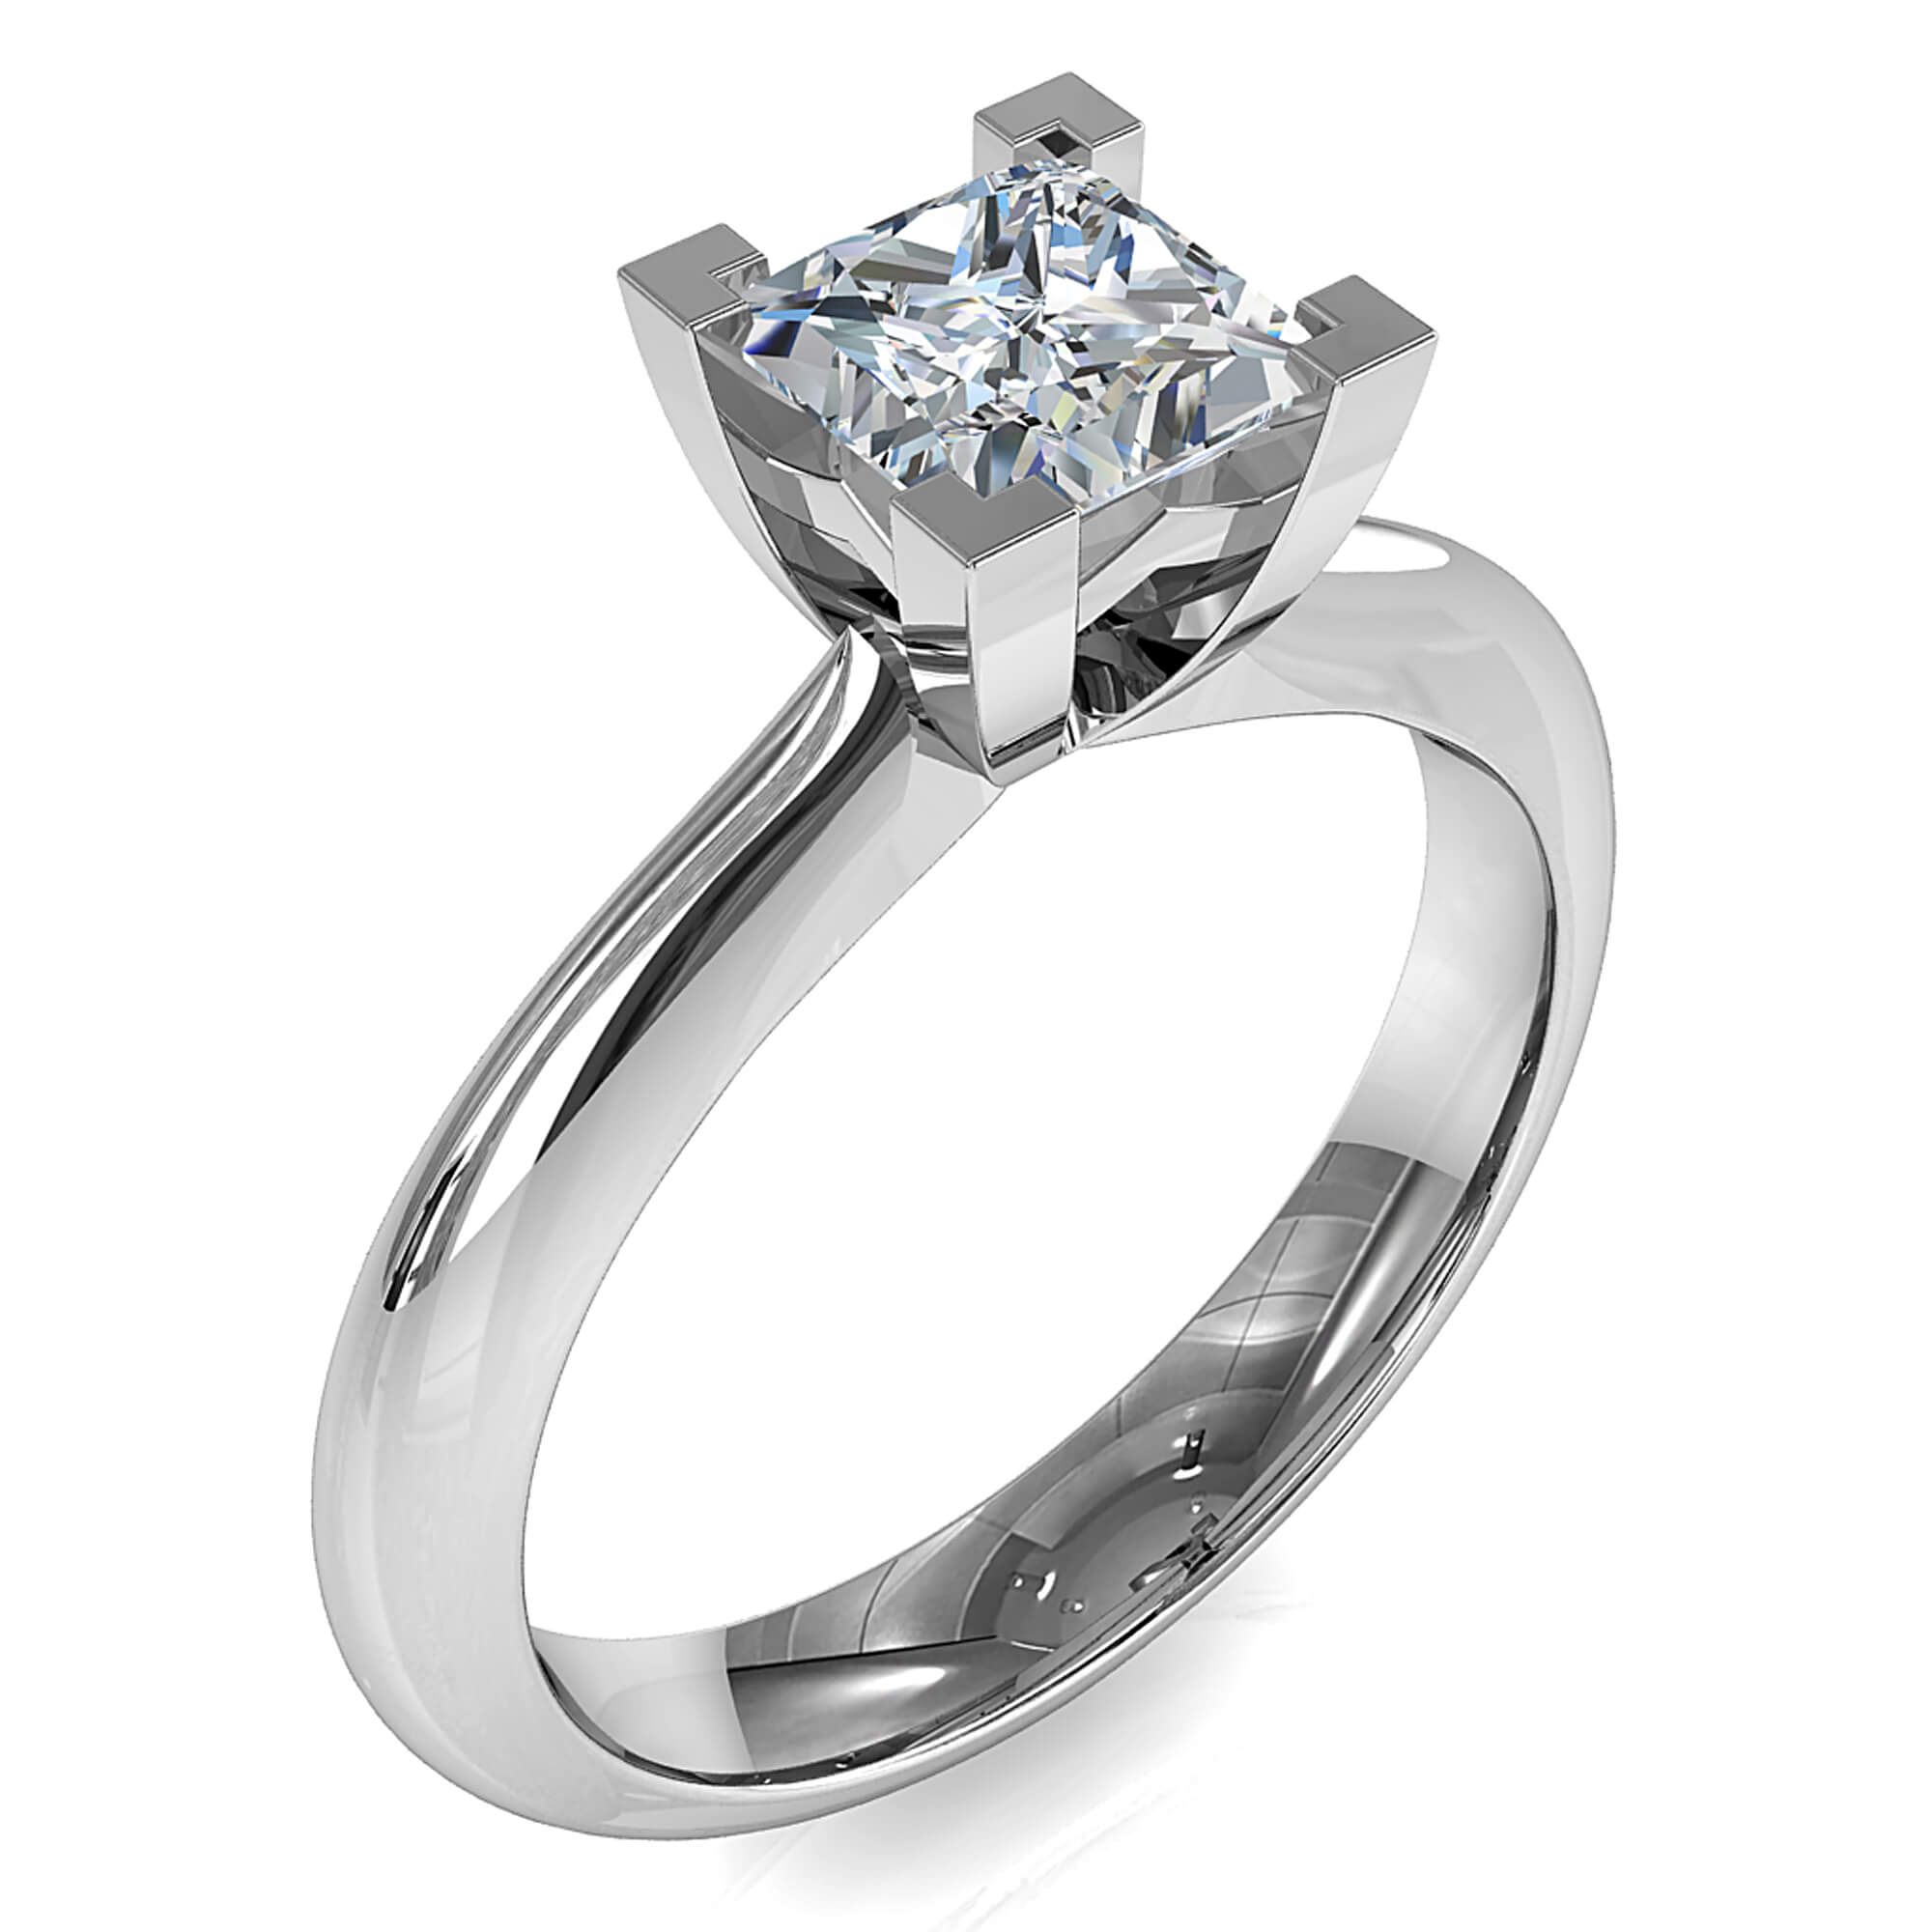 Princess Cut Solitaire Diamond Engagement Ring, 4 Corner Claws on a Tapered Round Band.